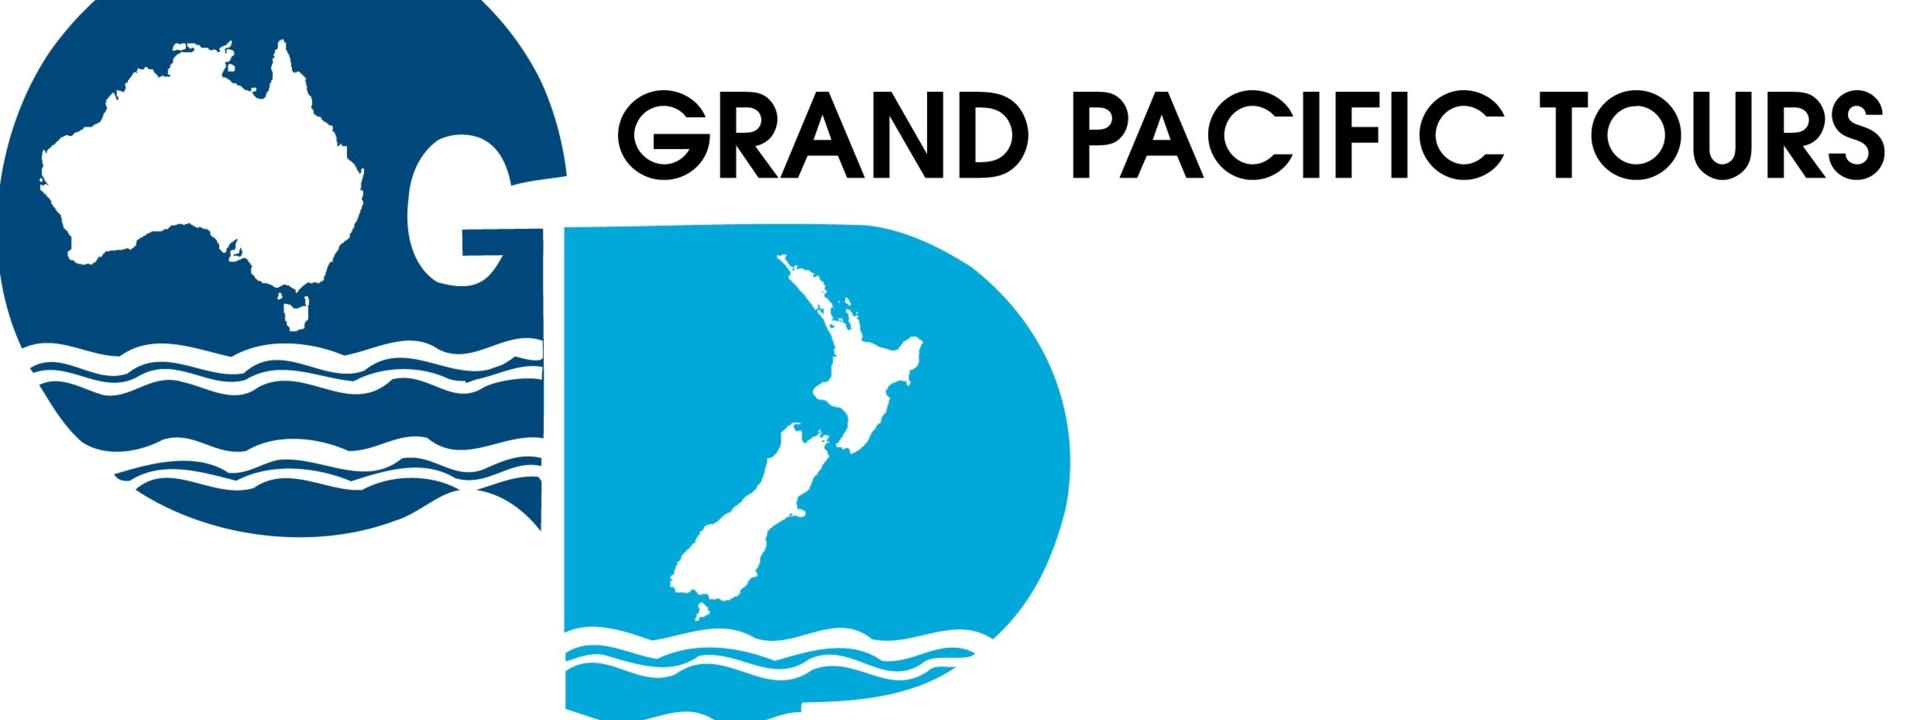 grand pacific travel & tours corp